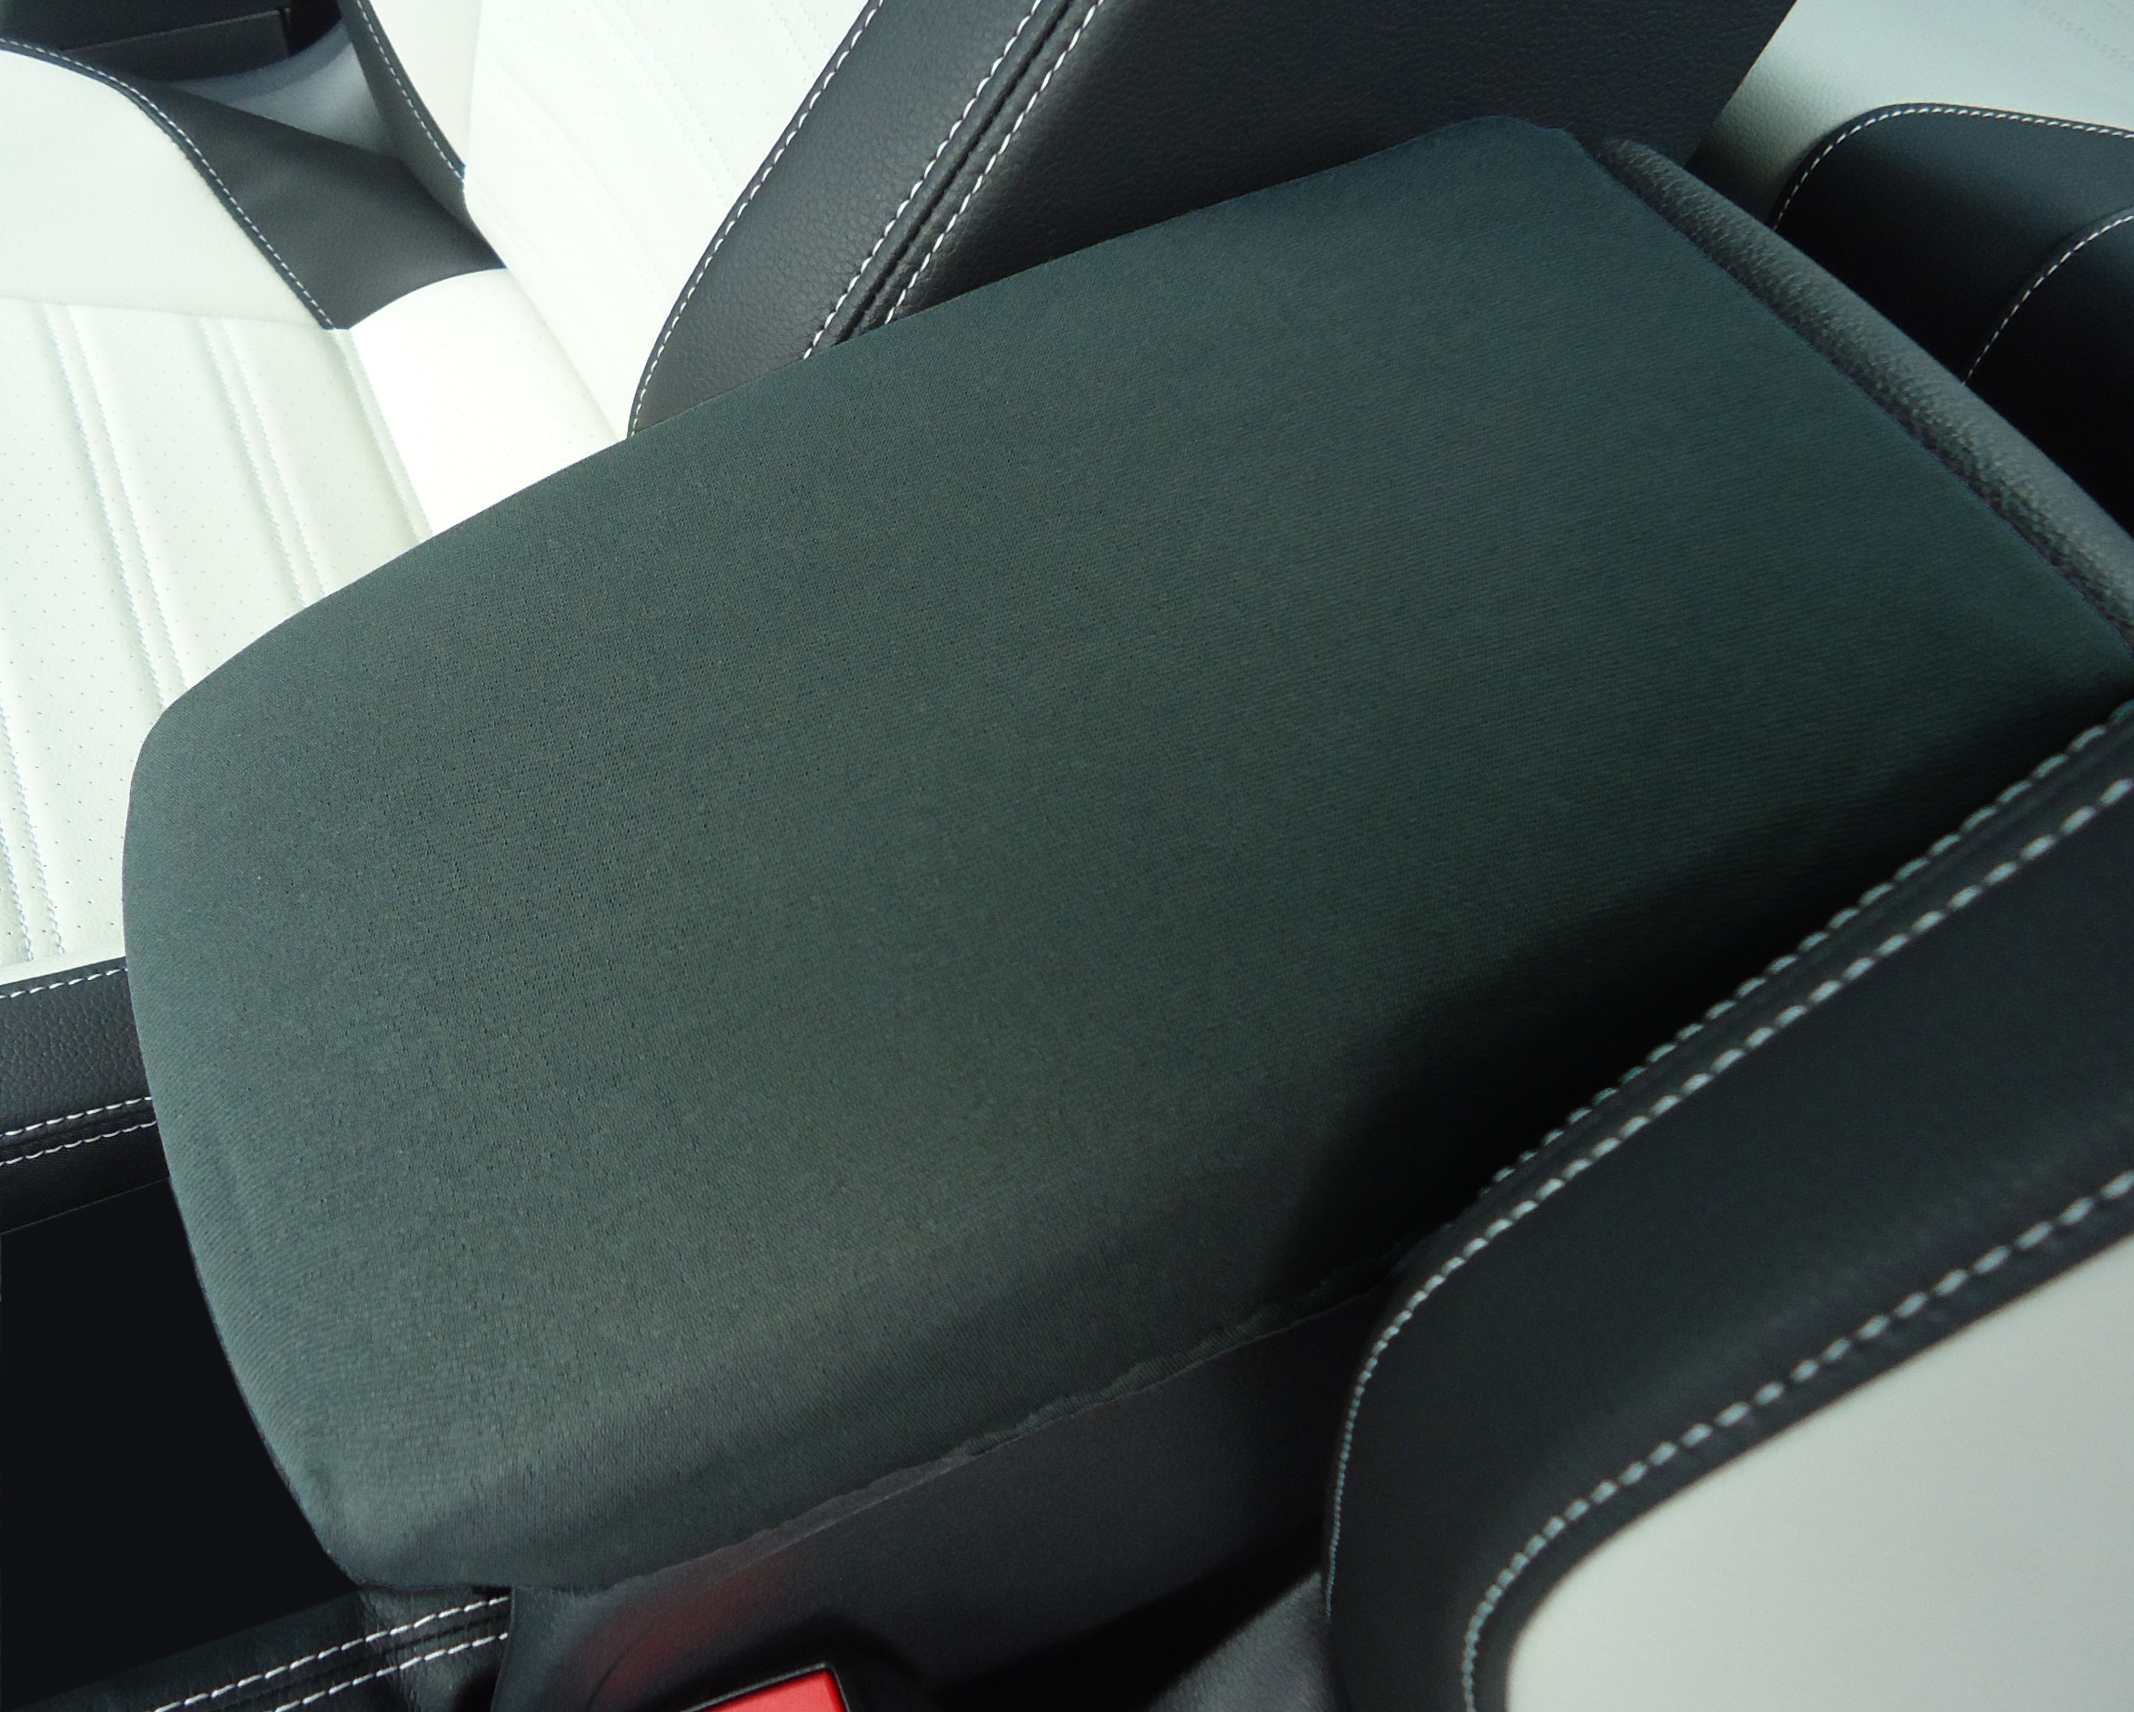 Topfans Fit for Hyundai All Series Auto Center Console Pad Car Armrest Seat Box Cover Protector,Hyundai Car Armrest Cover,Hyundai Carbon Fiber Leather Design Decoration Cushion 